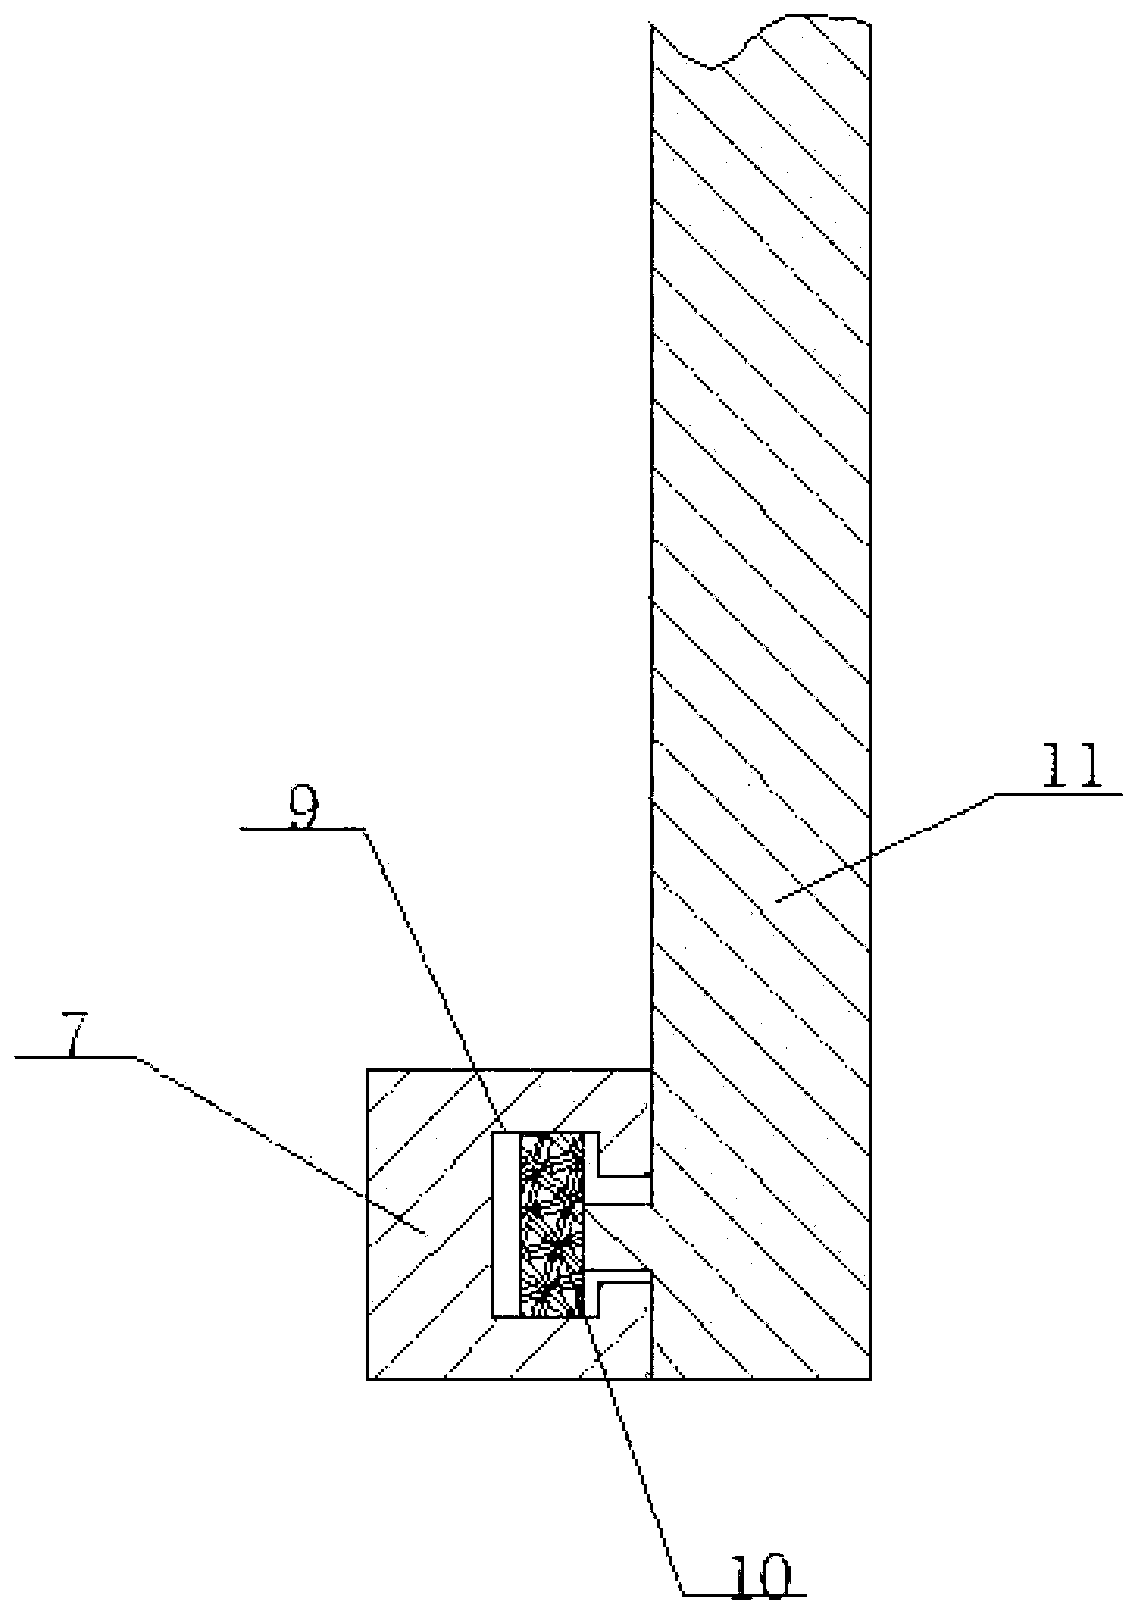 Lever-type automatic oiling device